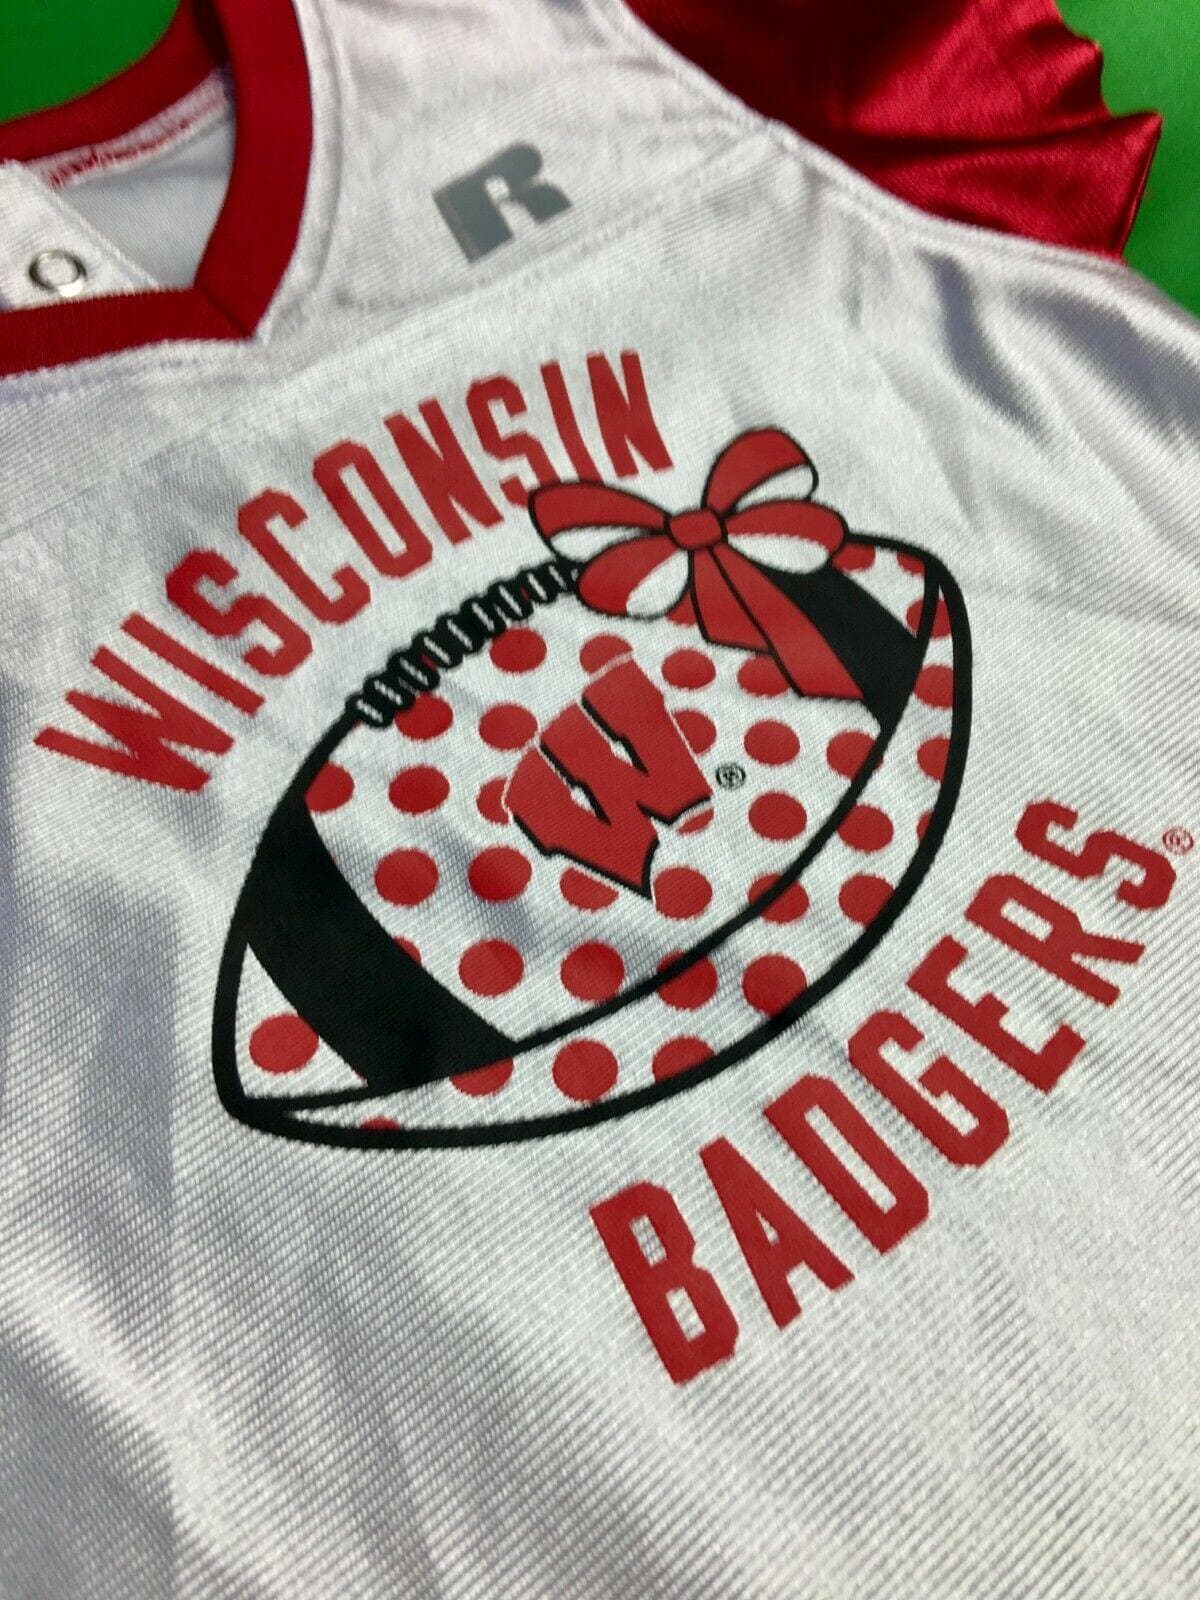 NCAA Wisconsin Badgers Russell Athletic Bodysuit/Vest 12 Months